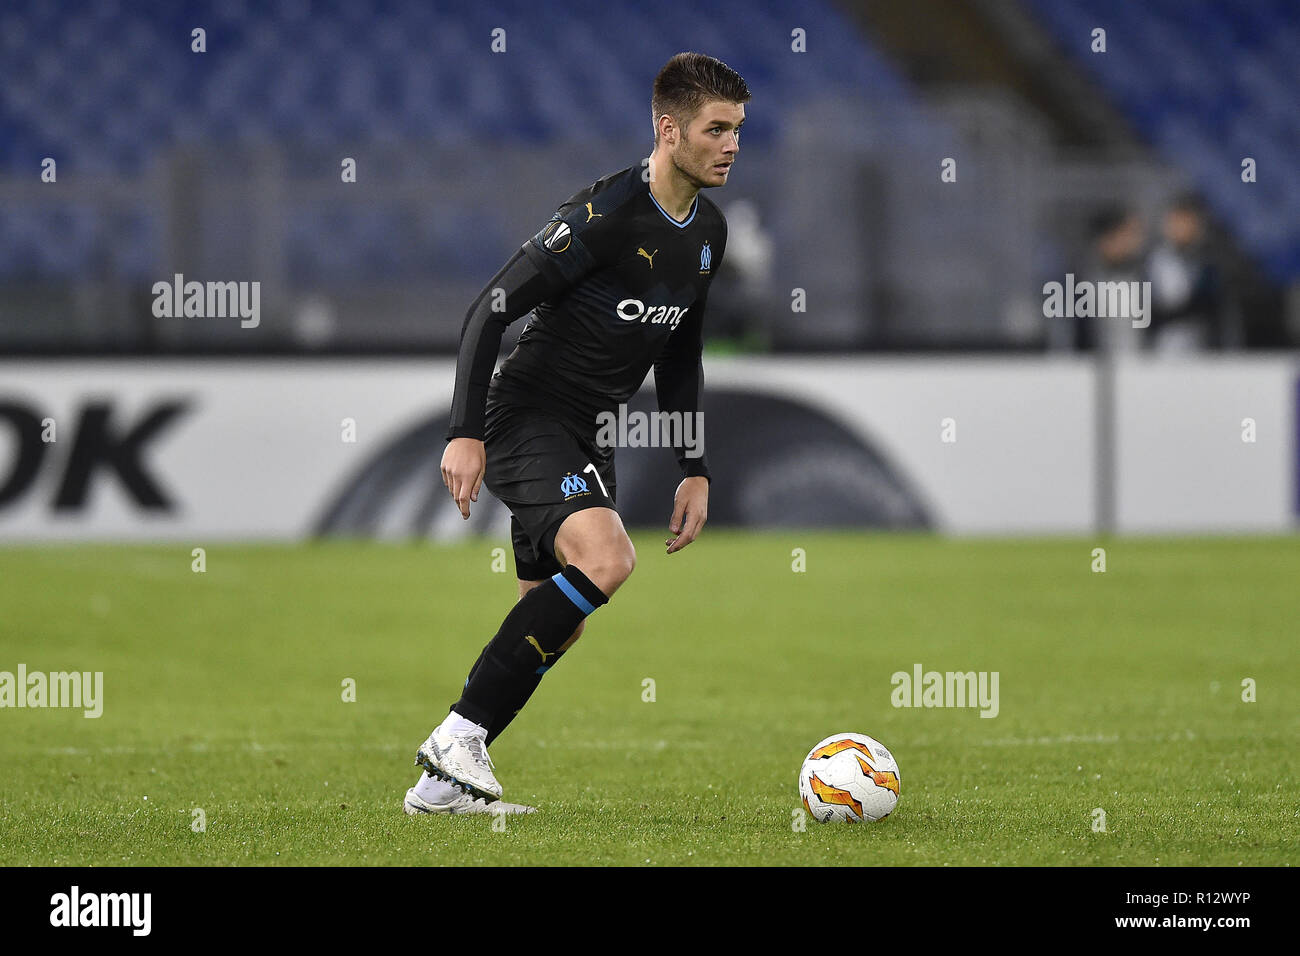 Rome, Italy. 8th November, 2018. Duje Caleta-Car of Olimpique de Marseille during the UEFA Europa League Group Stage match between Lazio and Olympique de Marseille at Stadio Olimpico, Rome, Italy on 8 November 2018. Photo by Giuseppe Maffia. Credit: UK Sports Pics Ltd/Alamy Live News Stock Photo